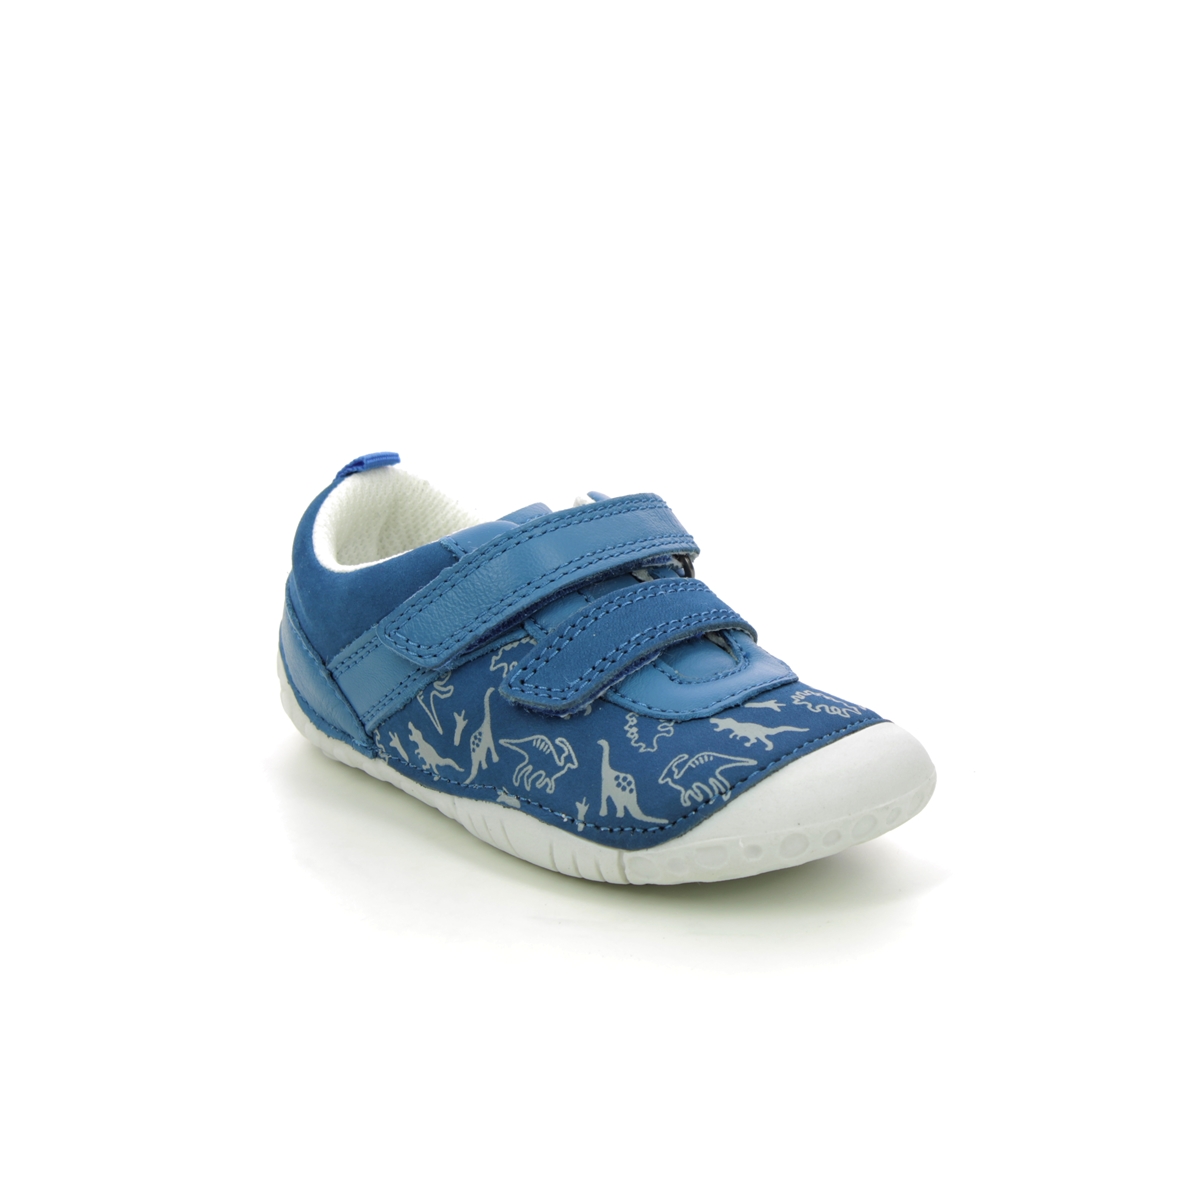 Start Rite - Roar 2V In Blue Nubuck 0767-26F In Size 4.5 In Plain Blue Nubuck Boys First And Toddler Shoes  In Blue Nubuck For kids